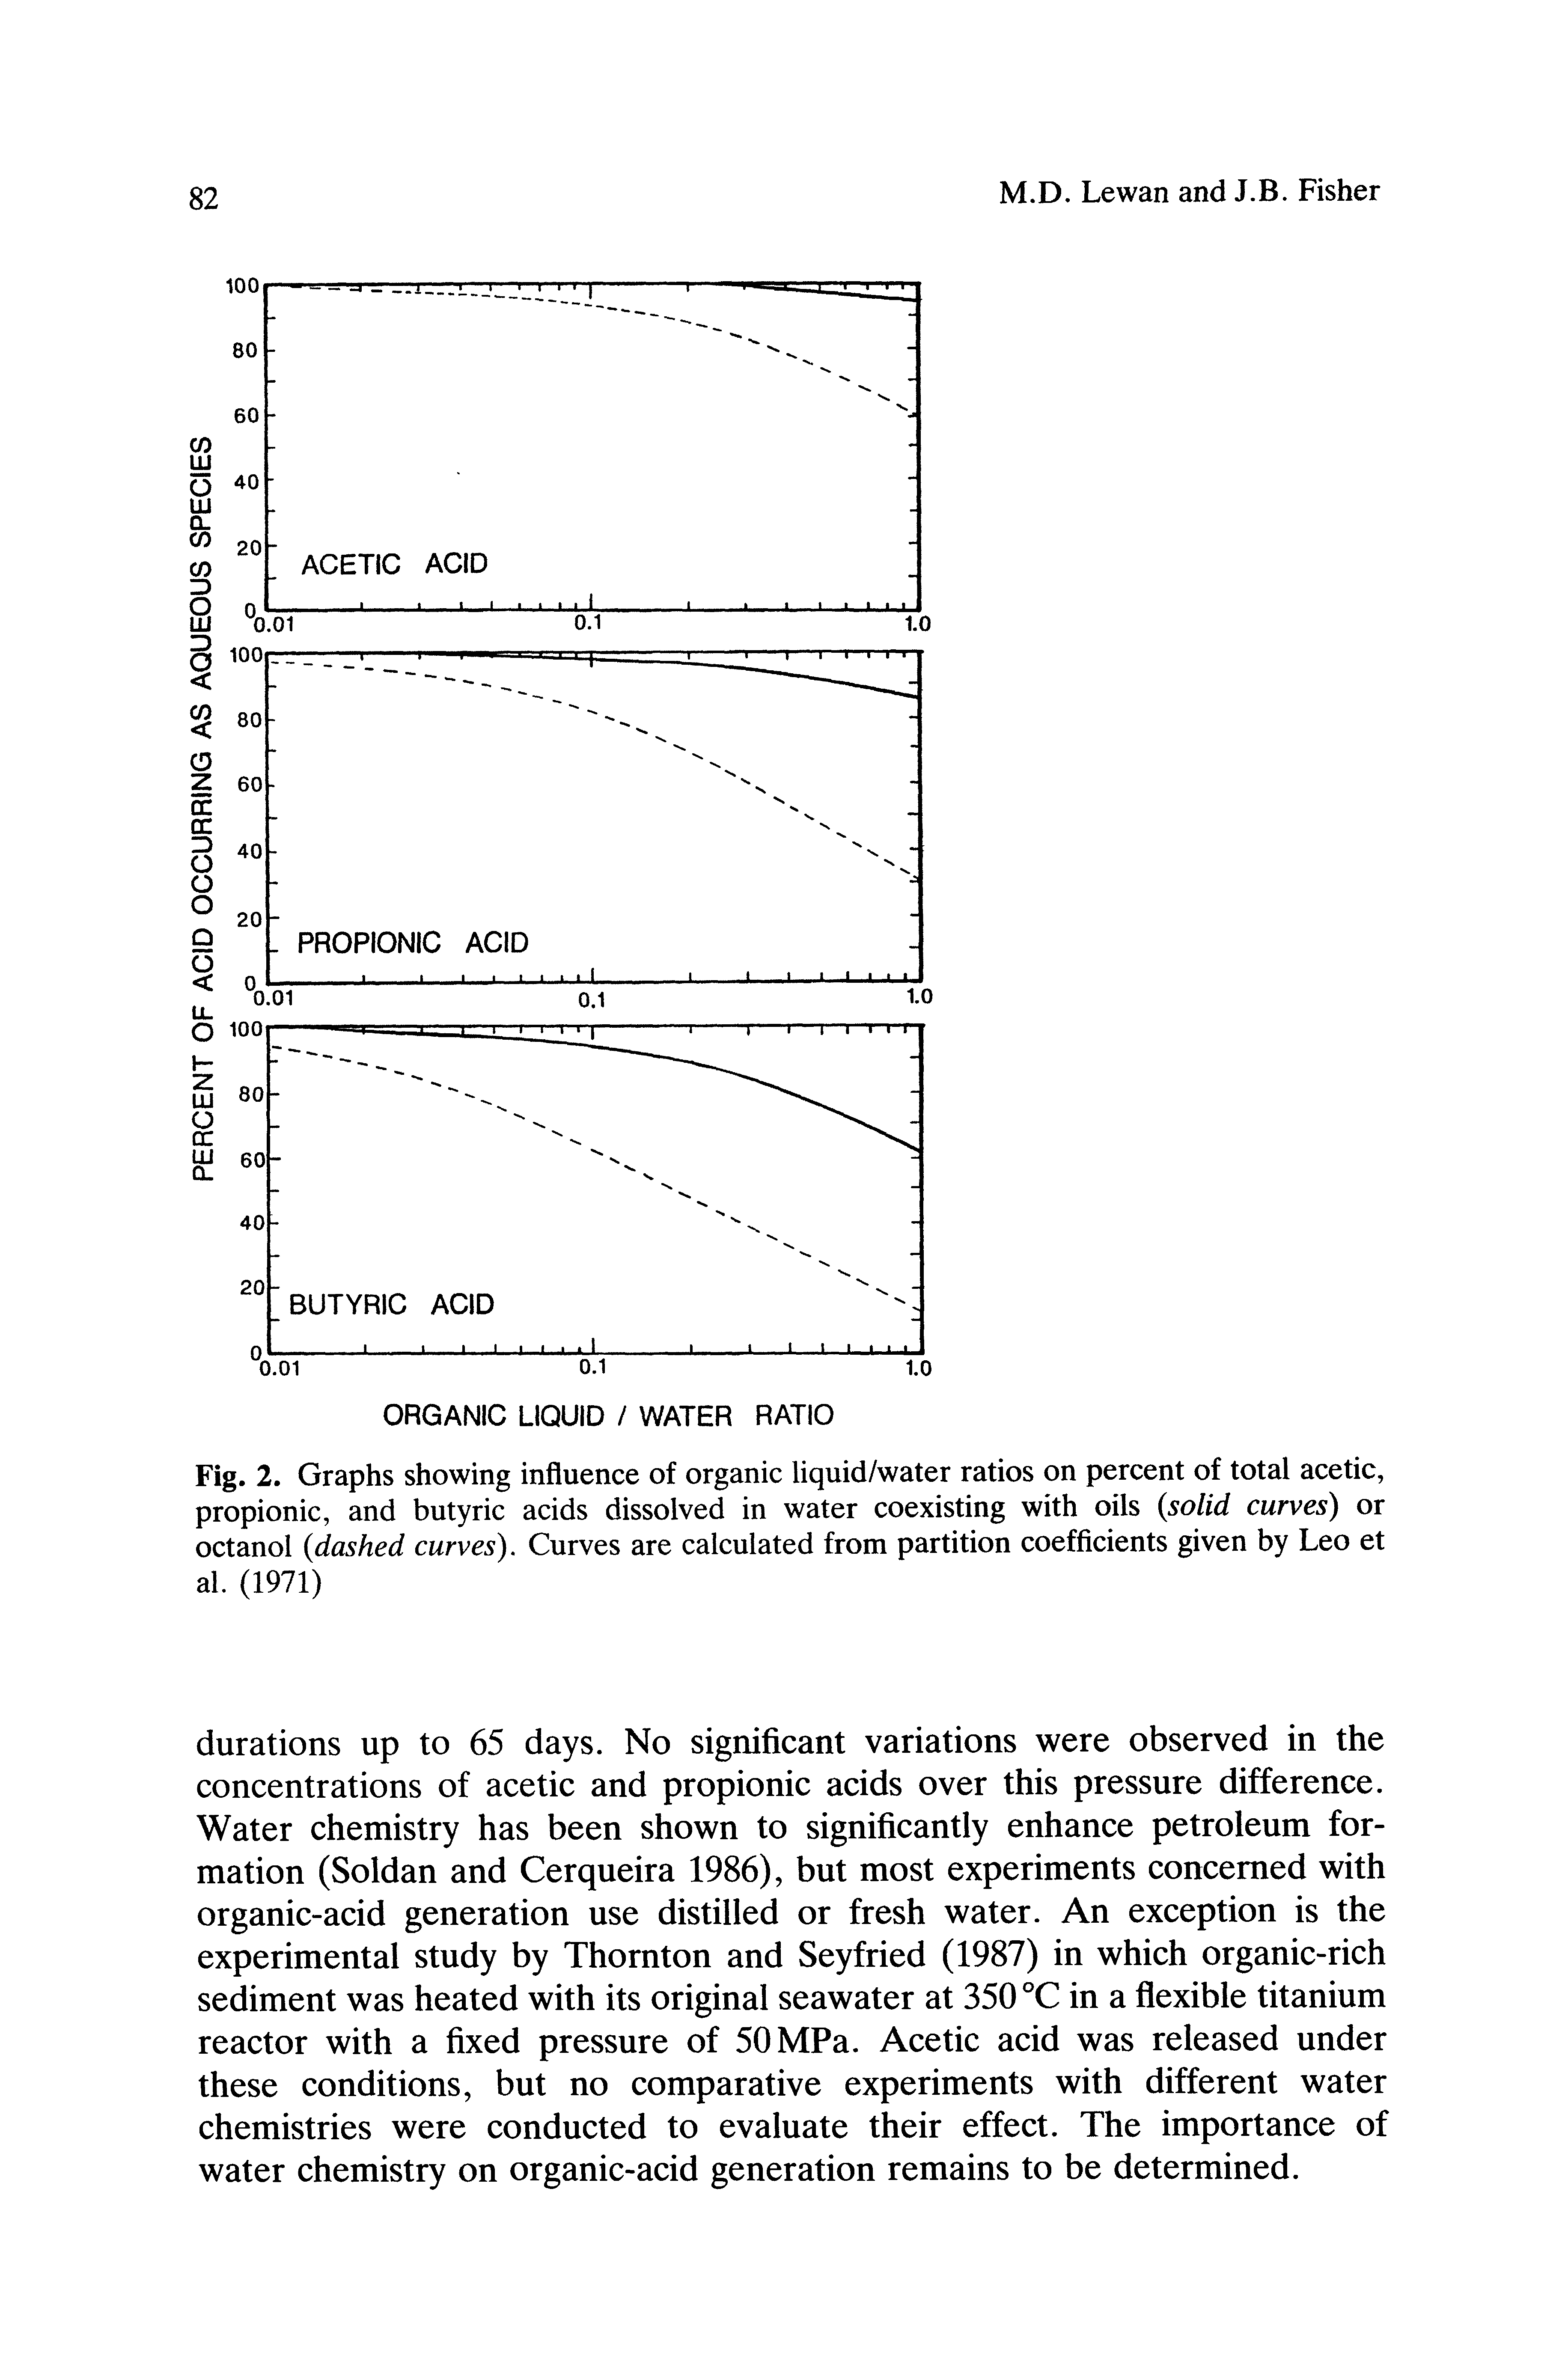 Fig. 2. Graphs showing influence of organic liquid/water ratios on percent of total acetic, propionic, and butyric acids dissolved in water coexisting with oils solid curves) or octanol dashed curves). Curves are calculated from partition coefficients given by Leo et al. (1971)...